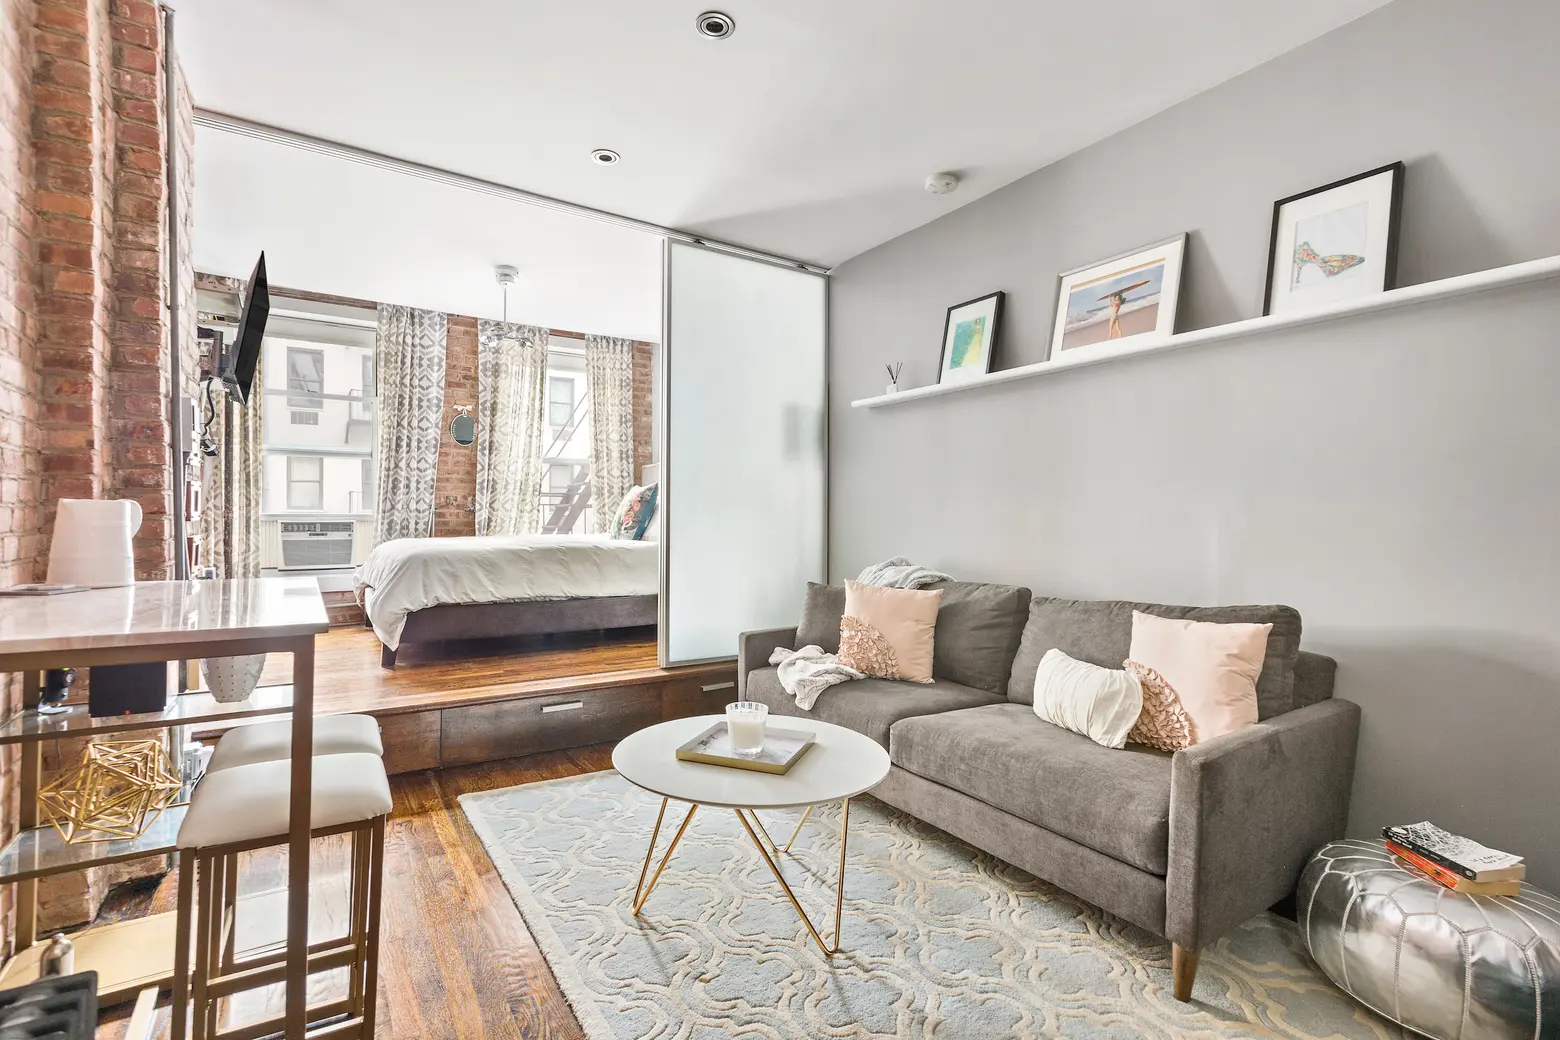 $525K East Village studio features lots of storage and a hidden solution for overnight guests